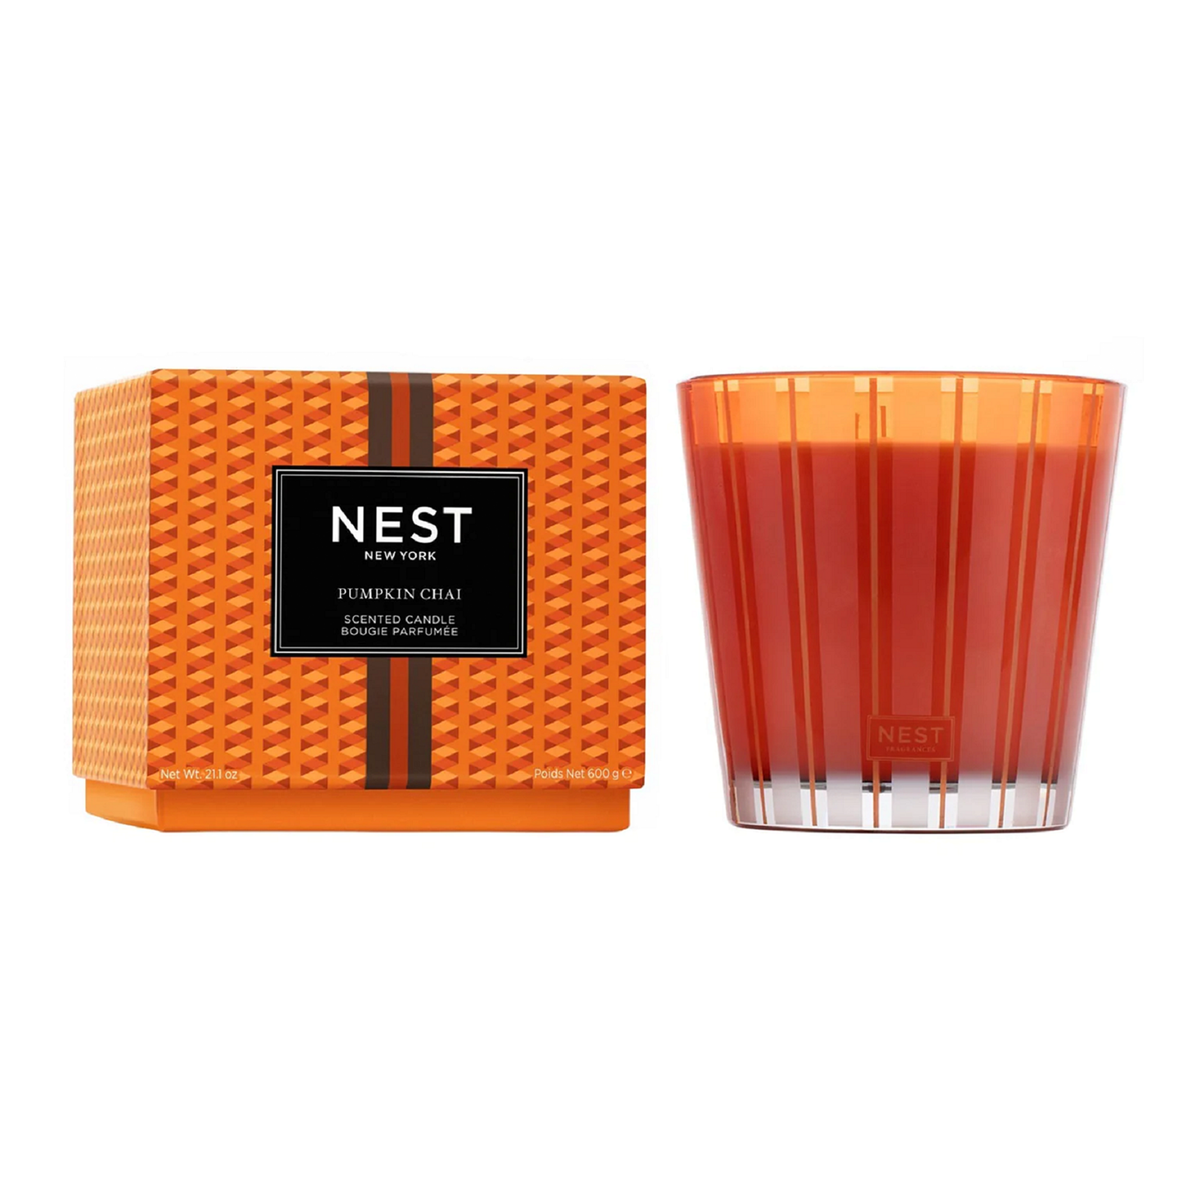 Product Image of Nest New York’s Pumpkin Chai 3 Wick Candle with Box